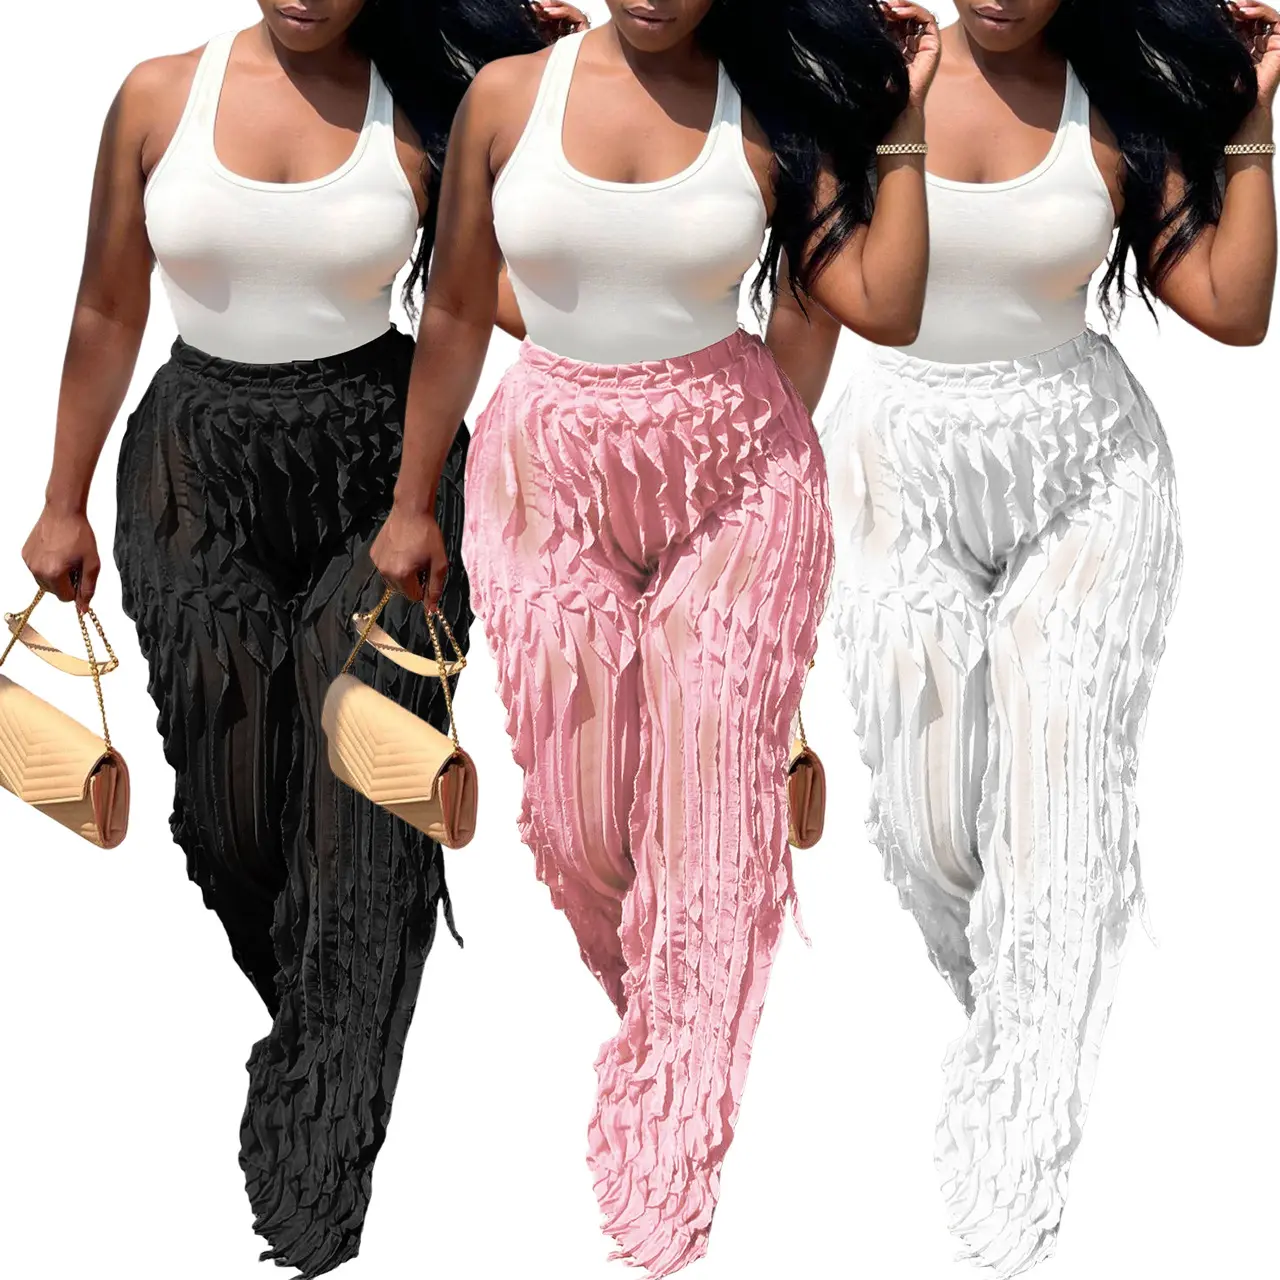 New arrivals pattern see-through high-waisted wide-leg pants solid color fashion lady trendy bottom trousers